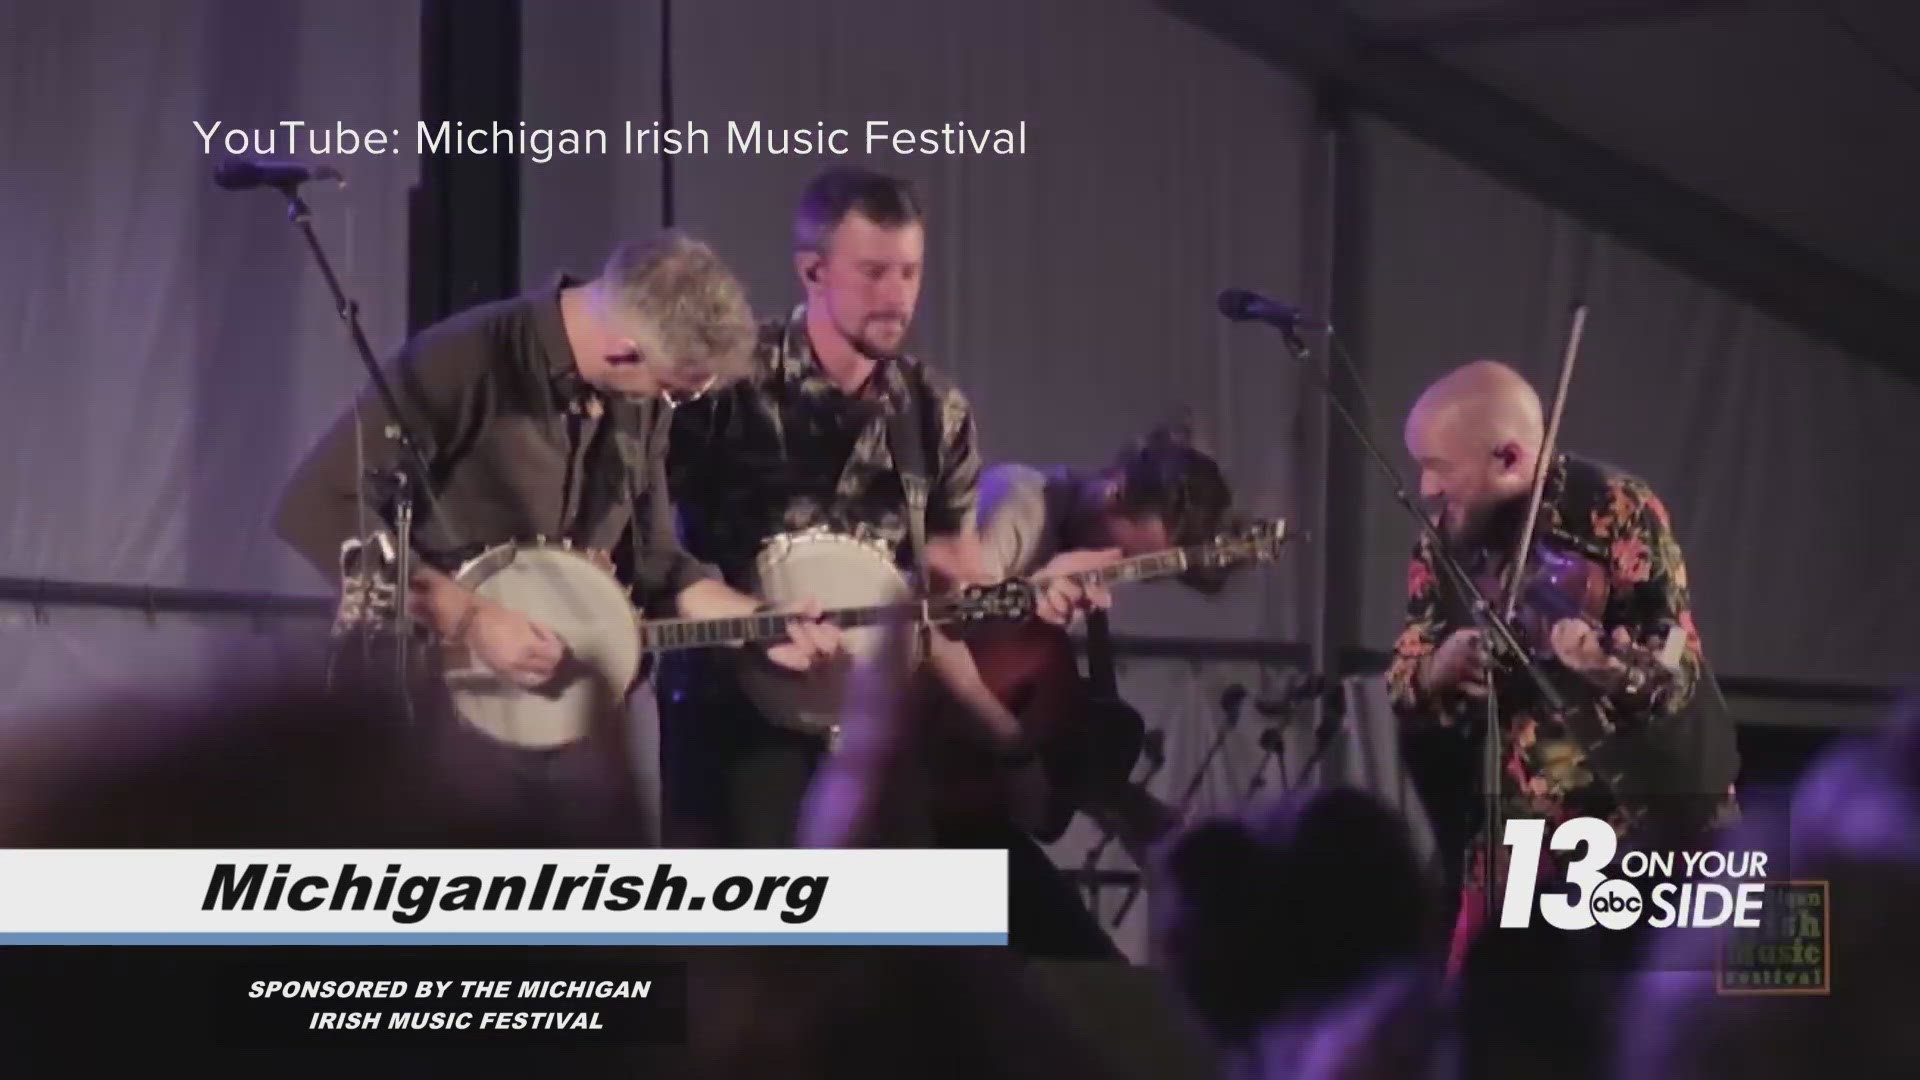 Of course, the festival features lots of great Irish music but let us not forget the food!